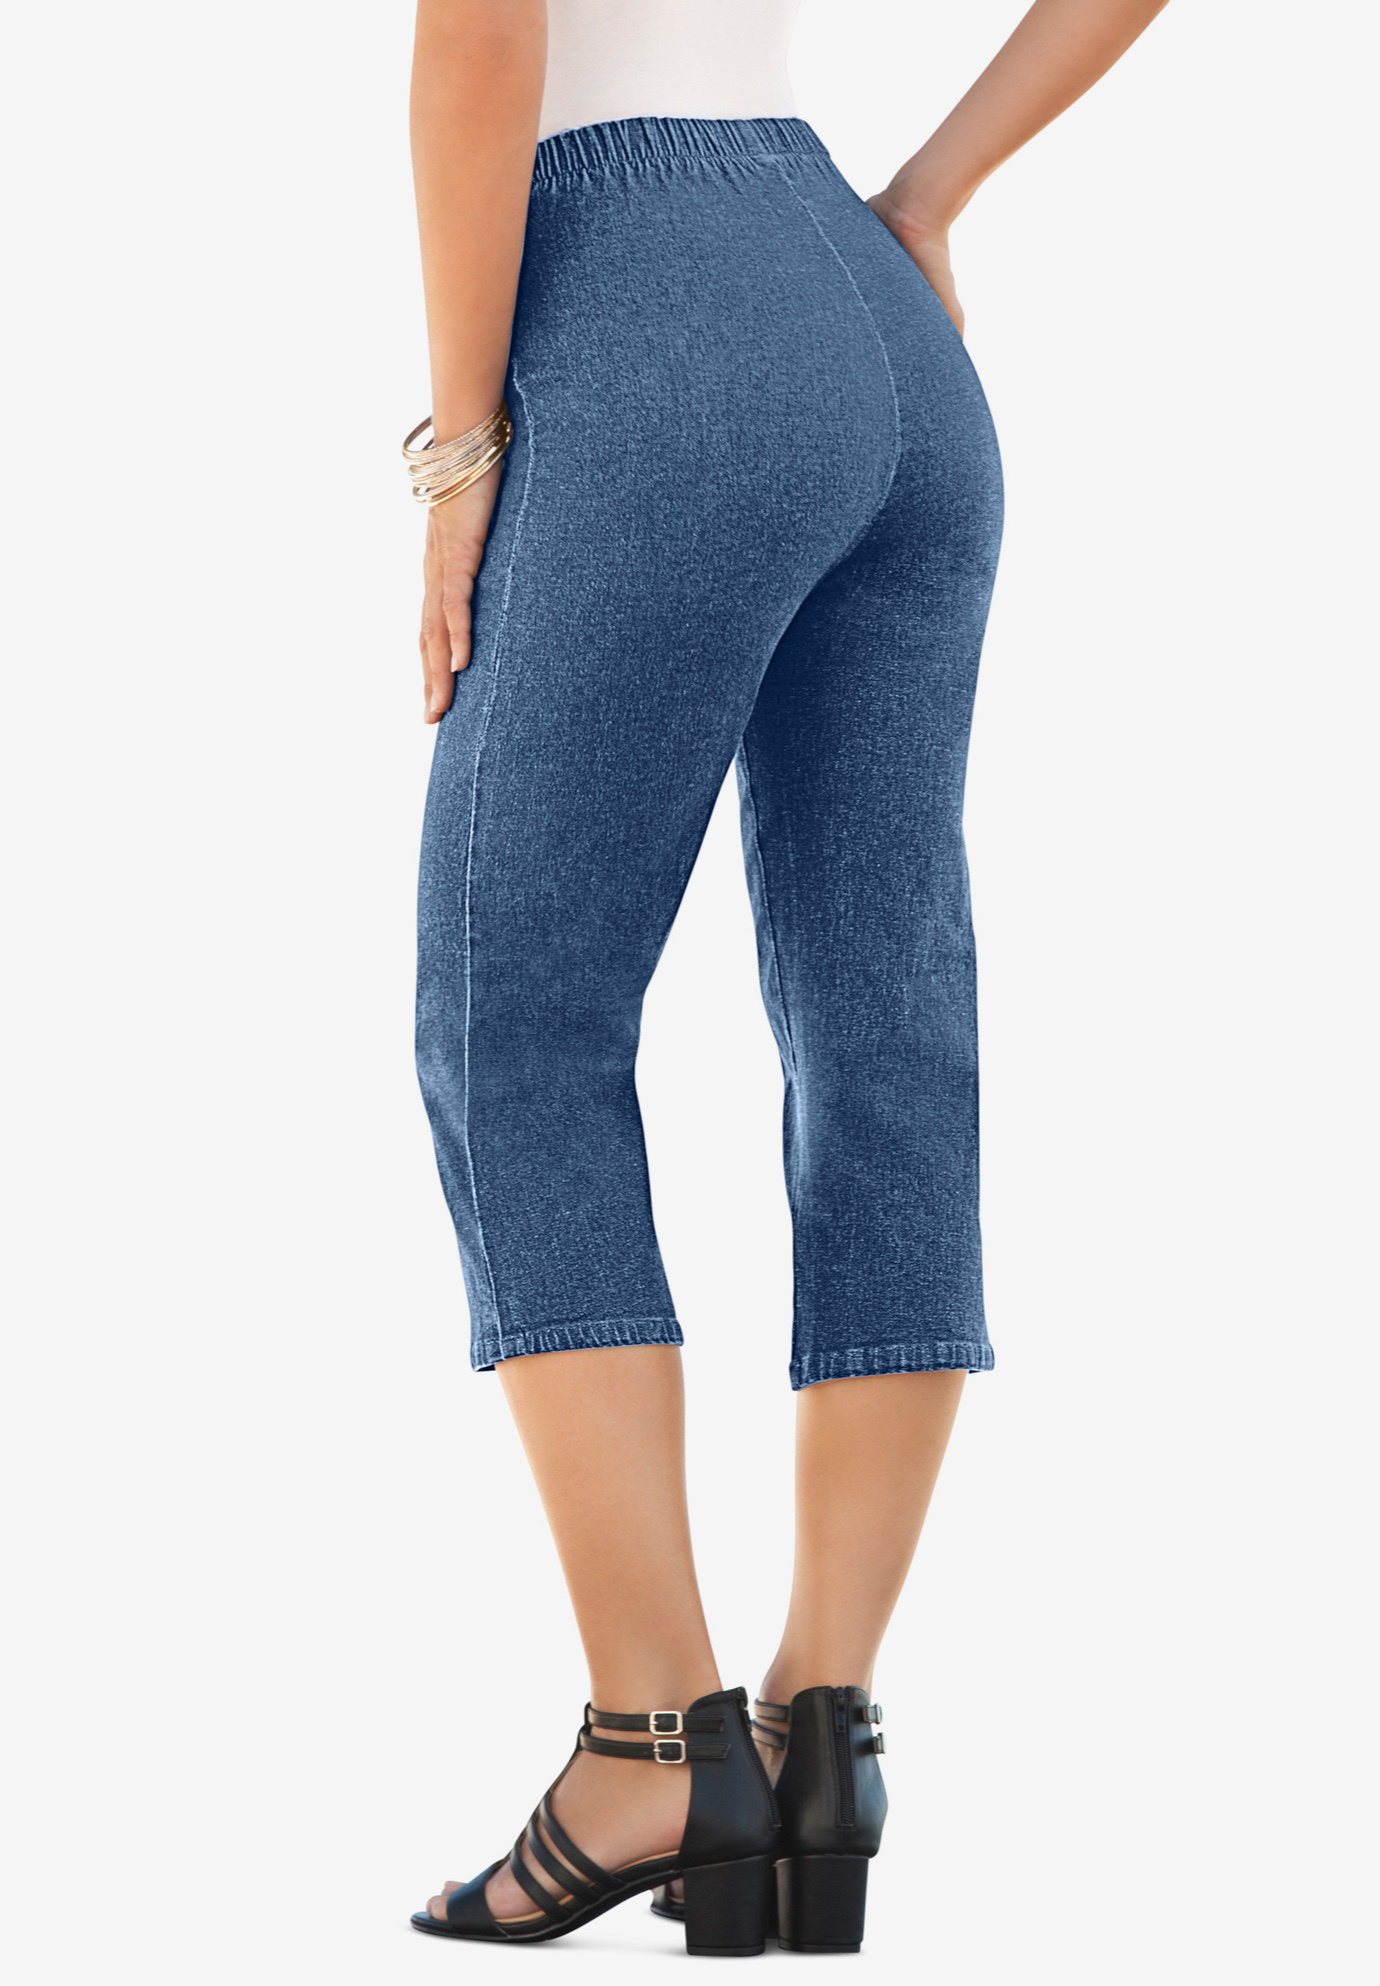 Capri Pull On Stretch Jean By Denim 247® Plus Size Capris And Shorts Roamans